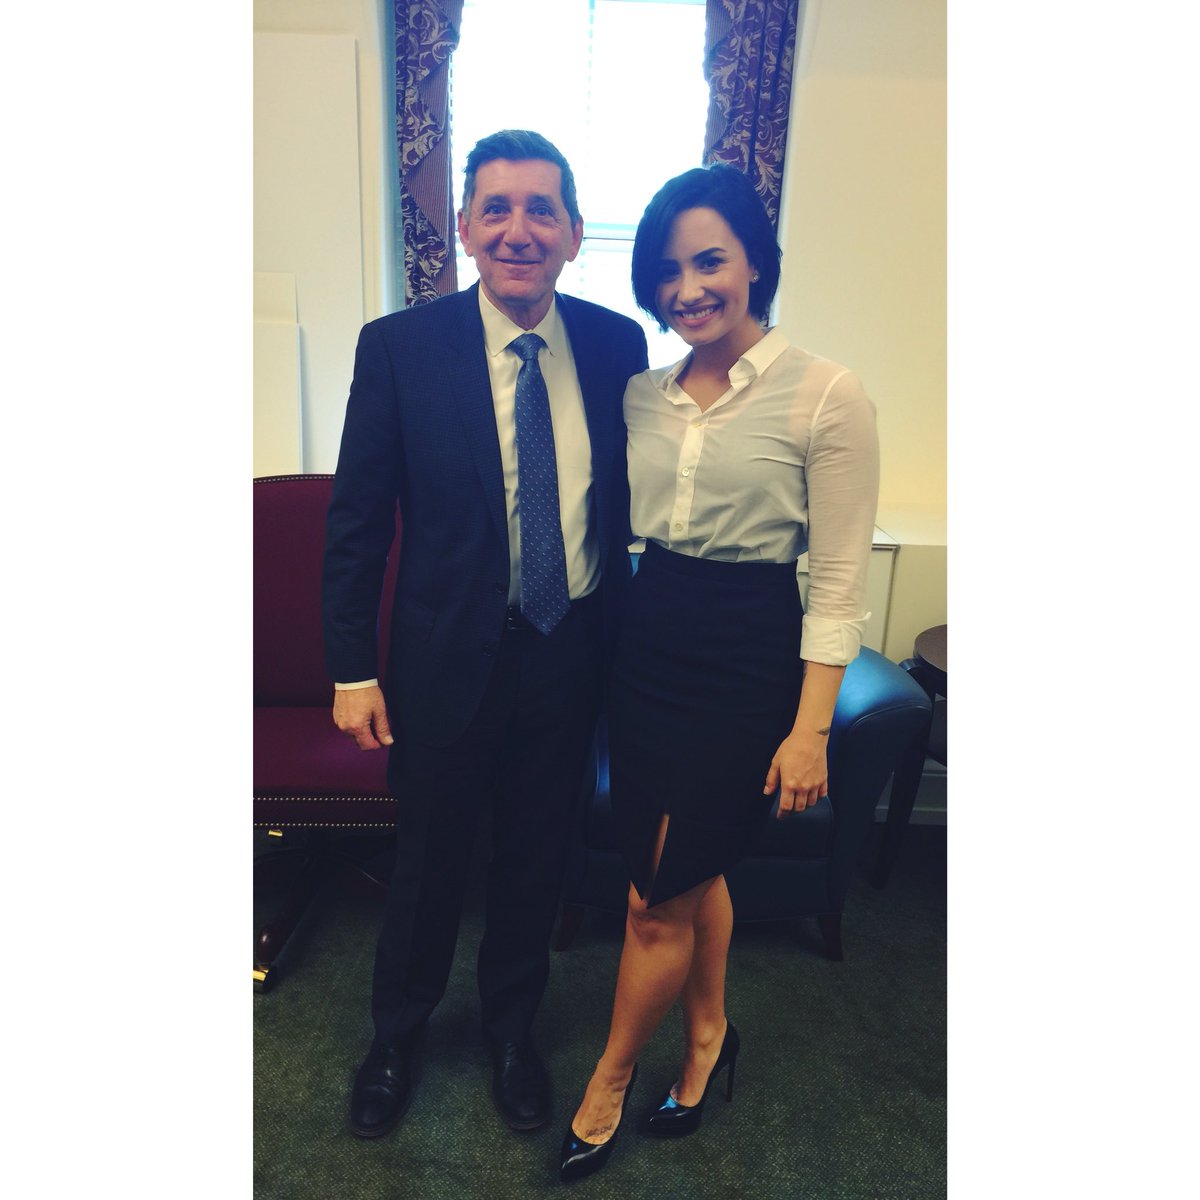 At the @WhiteHouse today with @Botticelli44… working on something big ???????? ✊ https://t.co/4L0vdzsBdB